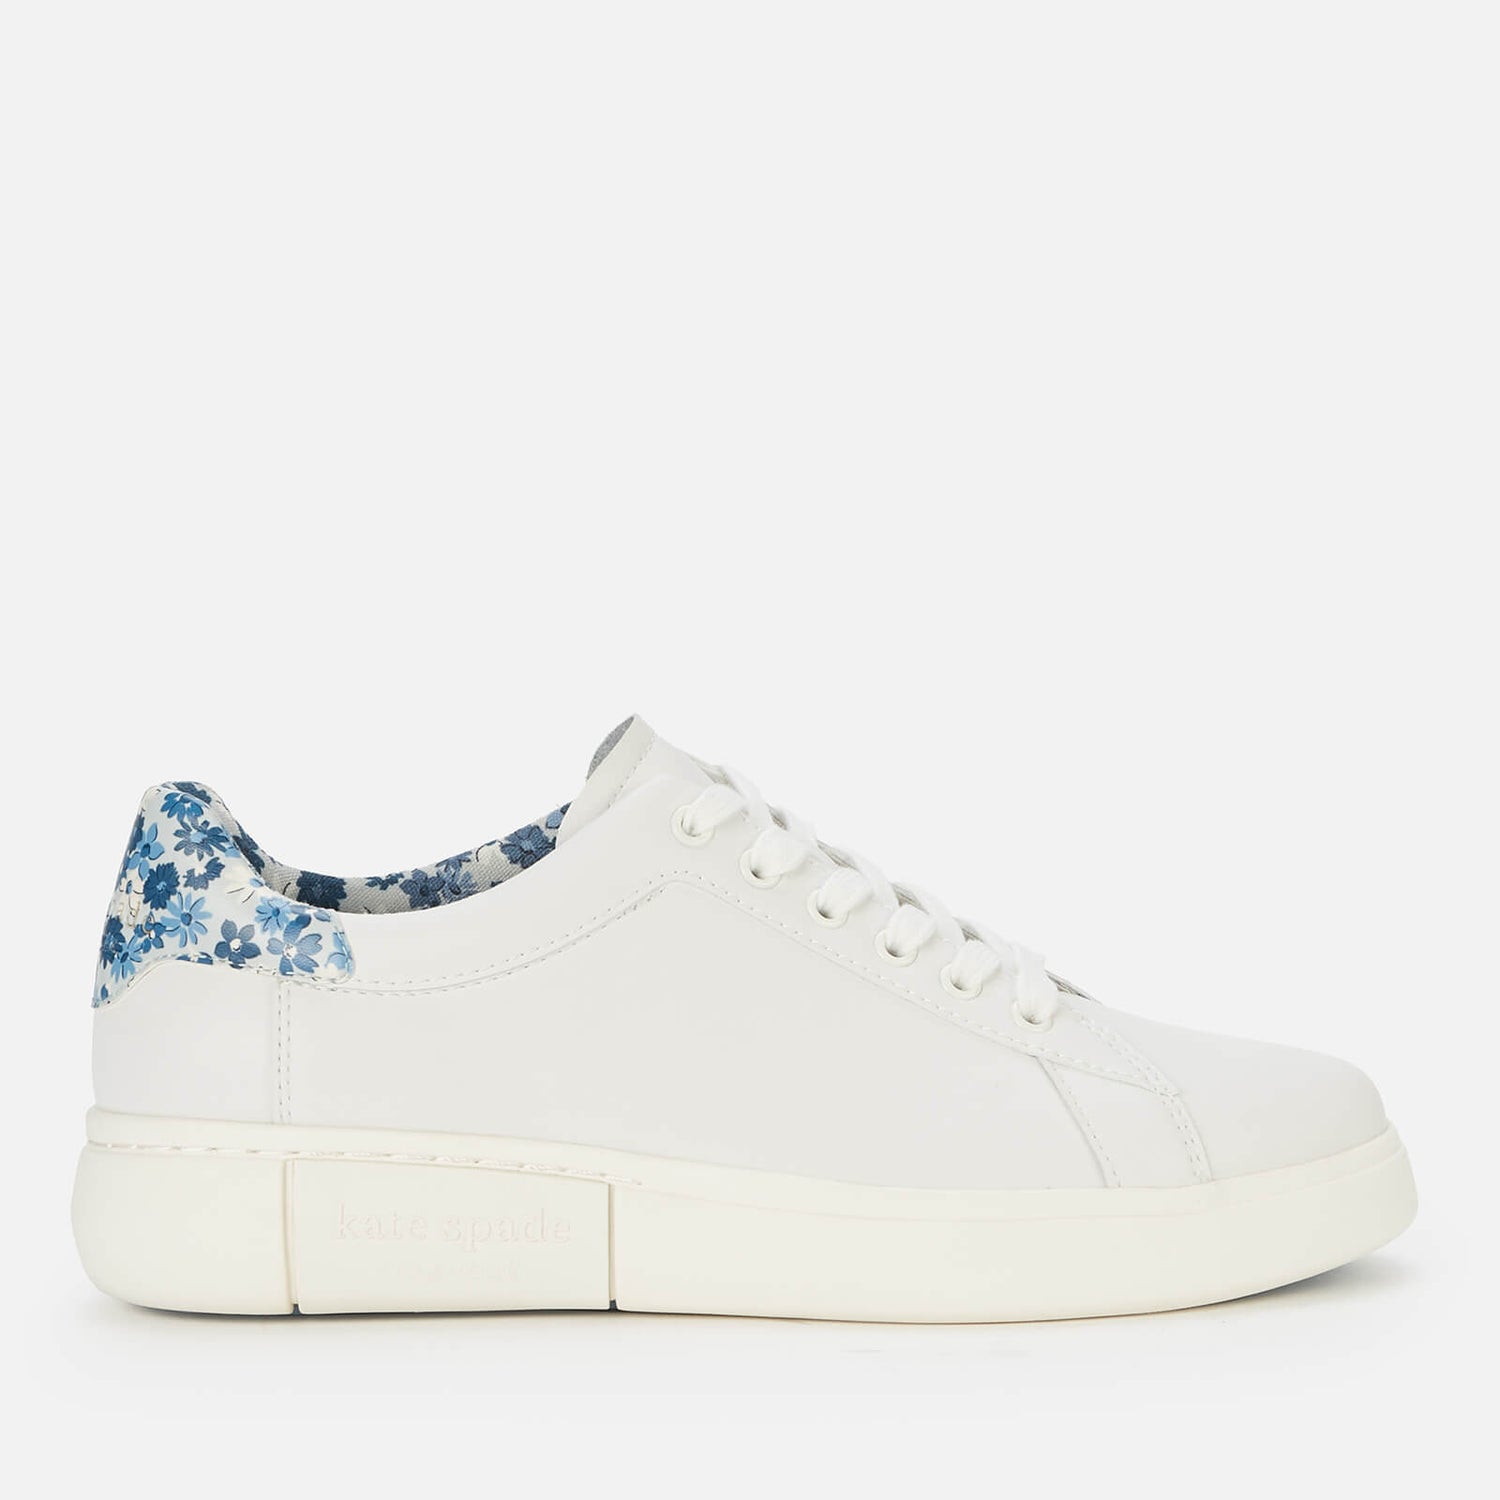 Kate Spade New York Women's Lift Leather Flatform Trainers - Optic White/Blue Floral - UK 3